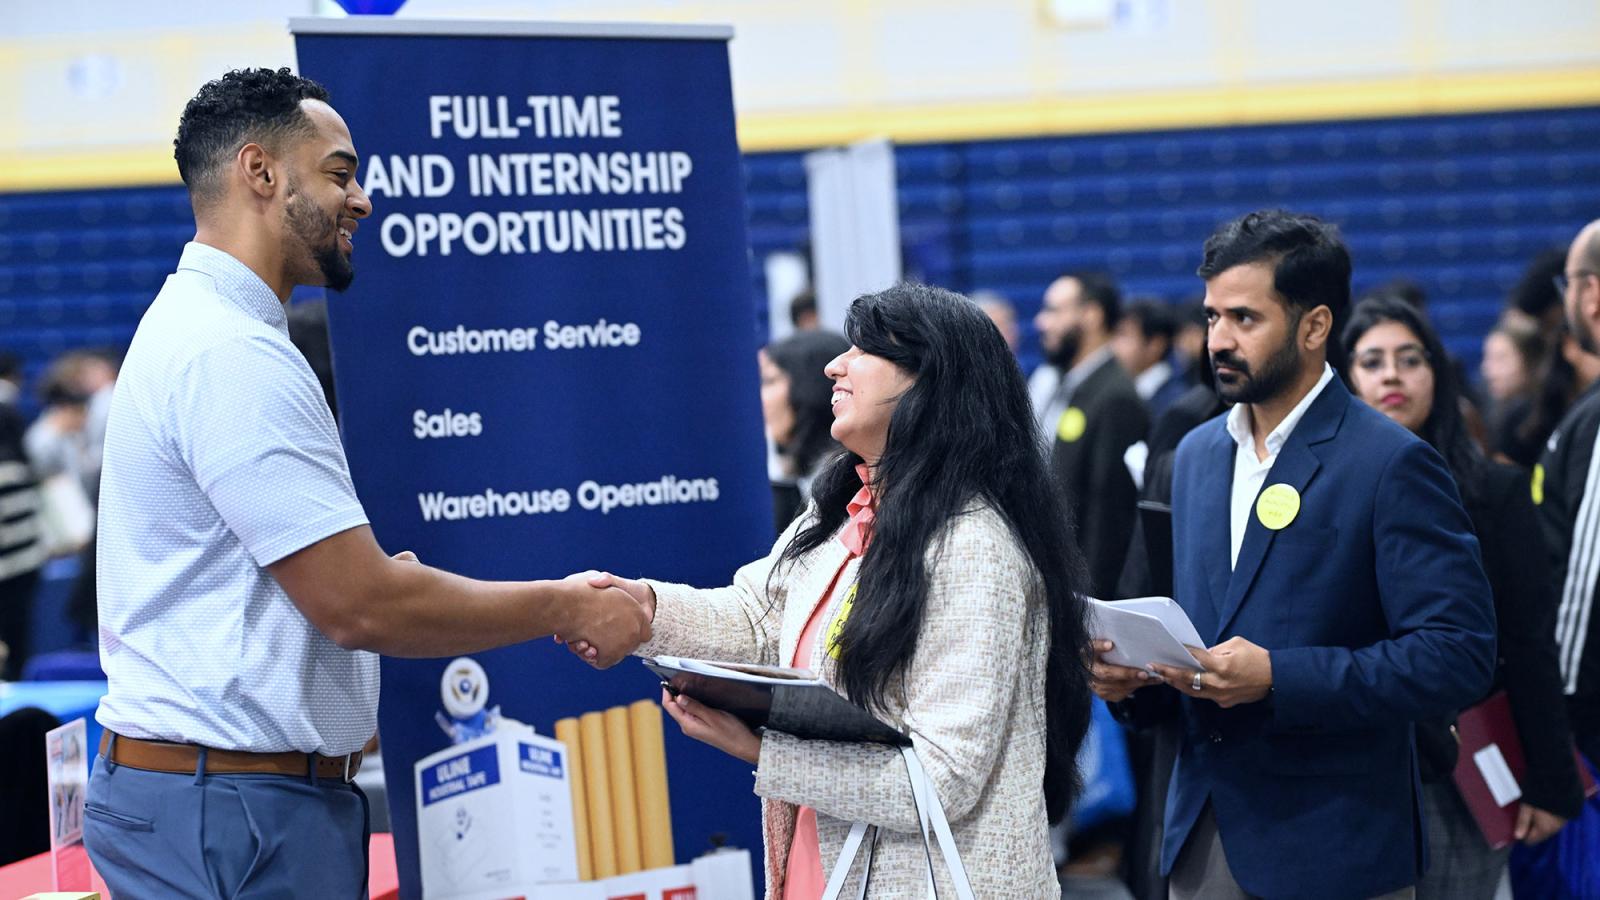 A Pace student shakes hands with someone at a Pace Career fair